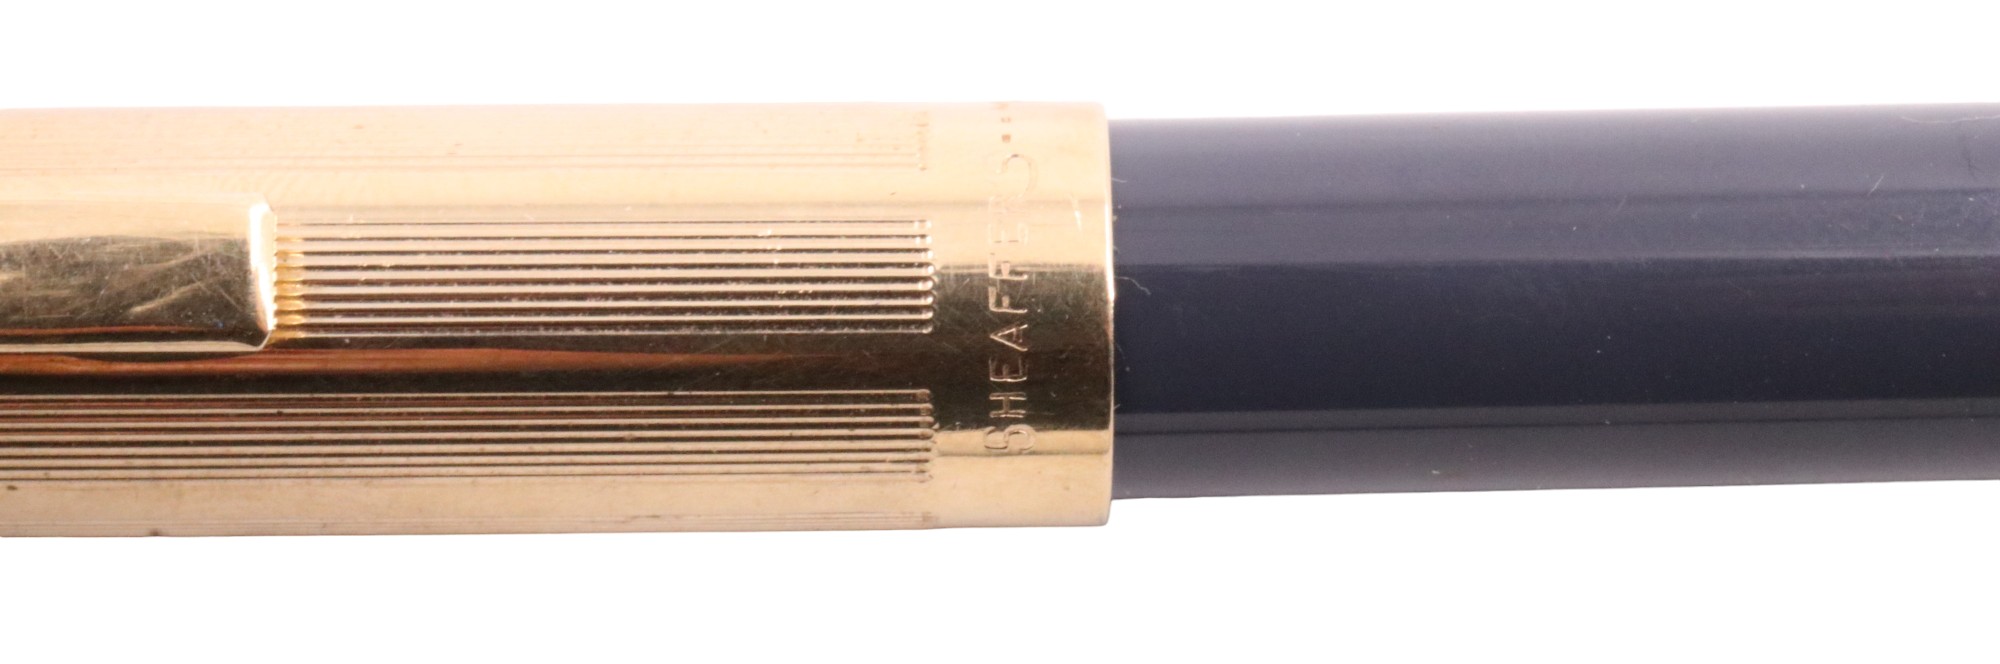 A vintage Sheaffer fountain pen with a 14 K nib, together with a similar Waterman's fountain pen - Image 3 of 5